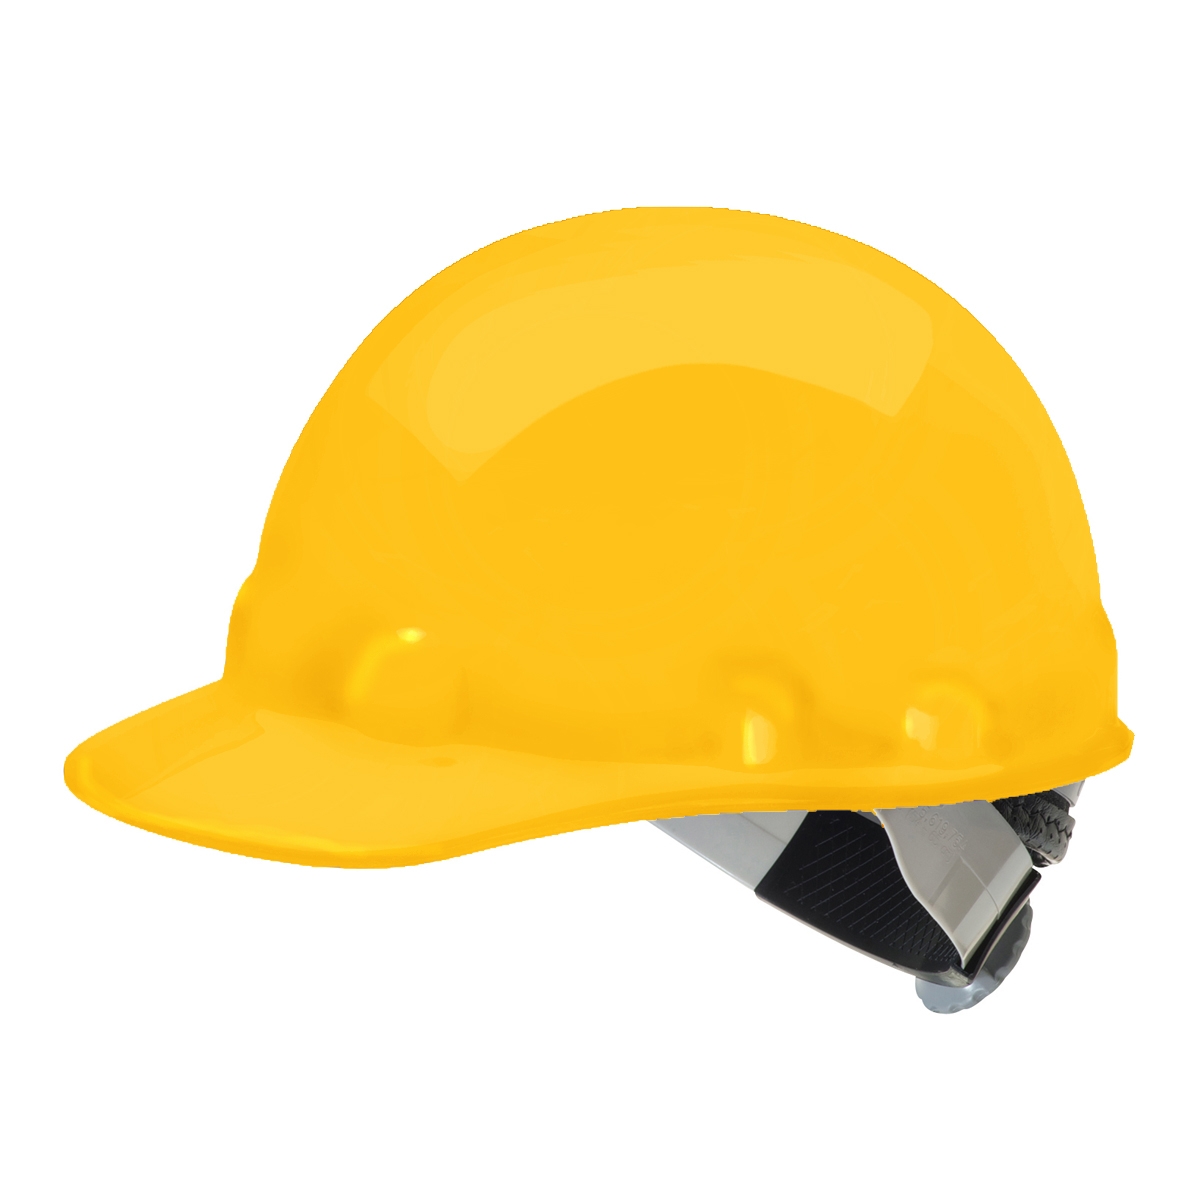 red hard hat clipart - photo #31